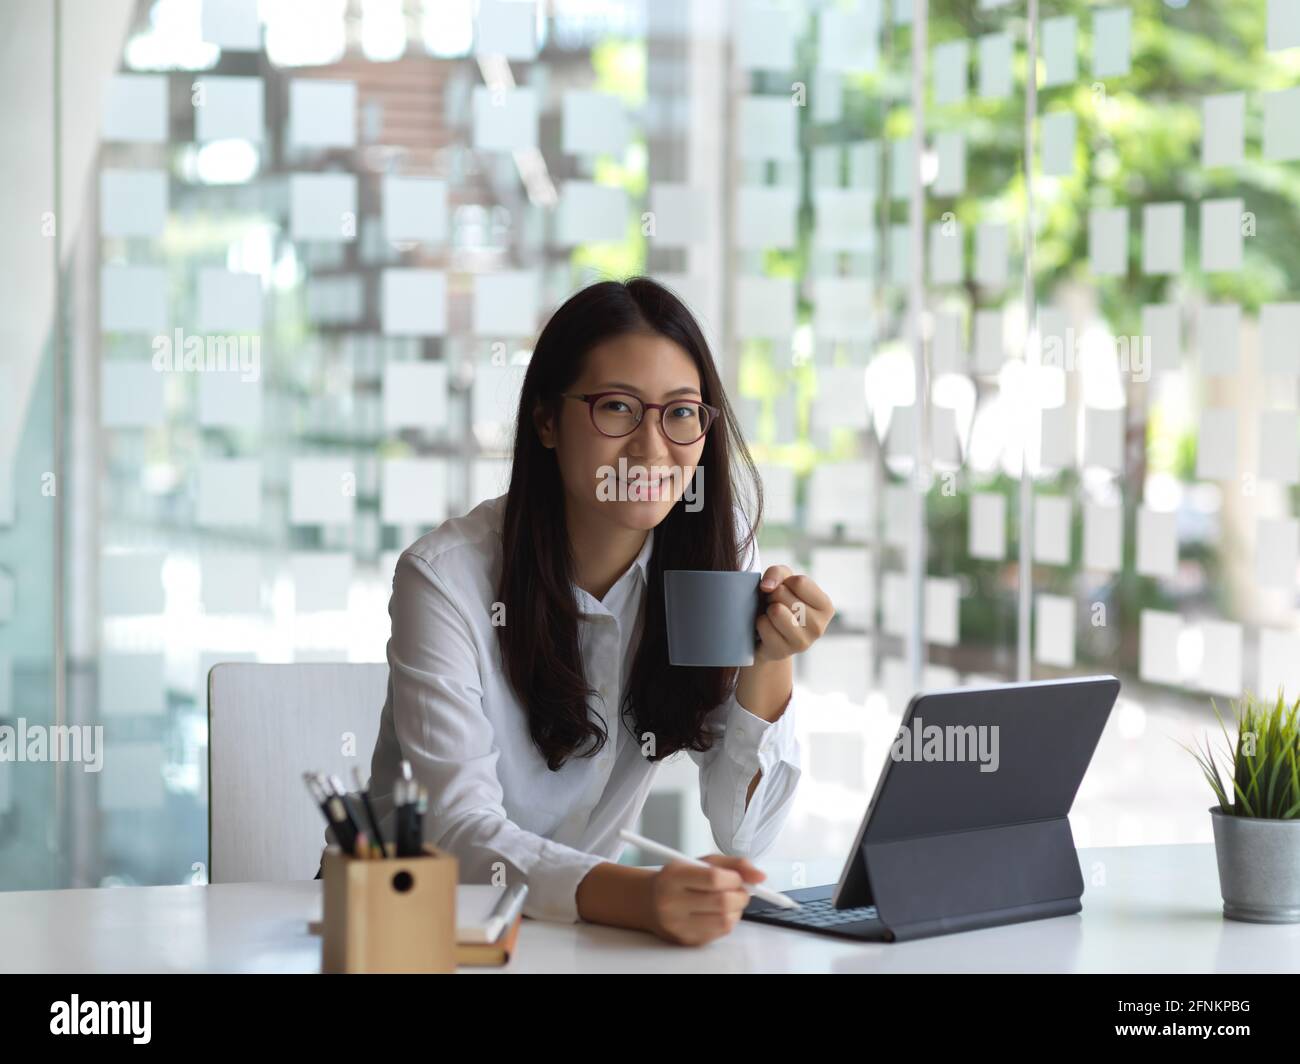 Porttrait of female office worker holding cup while working with tablet and stationery Stock Photo